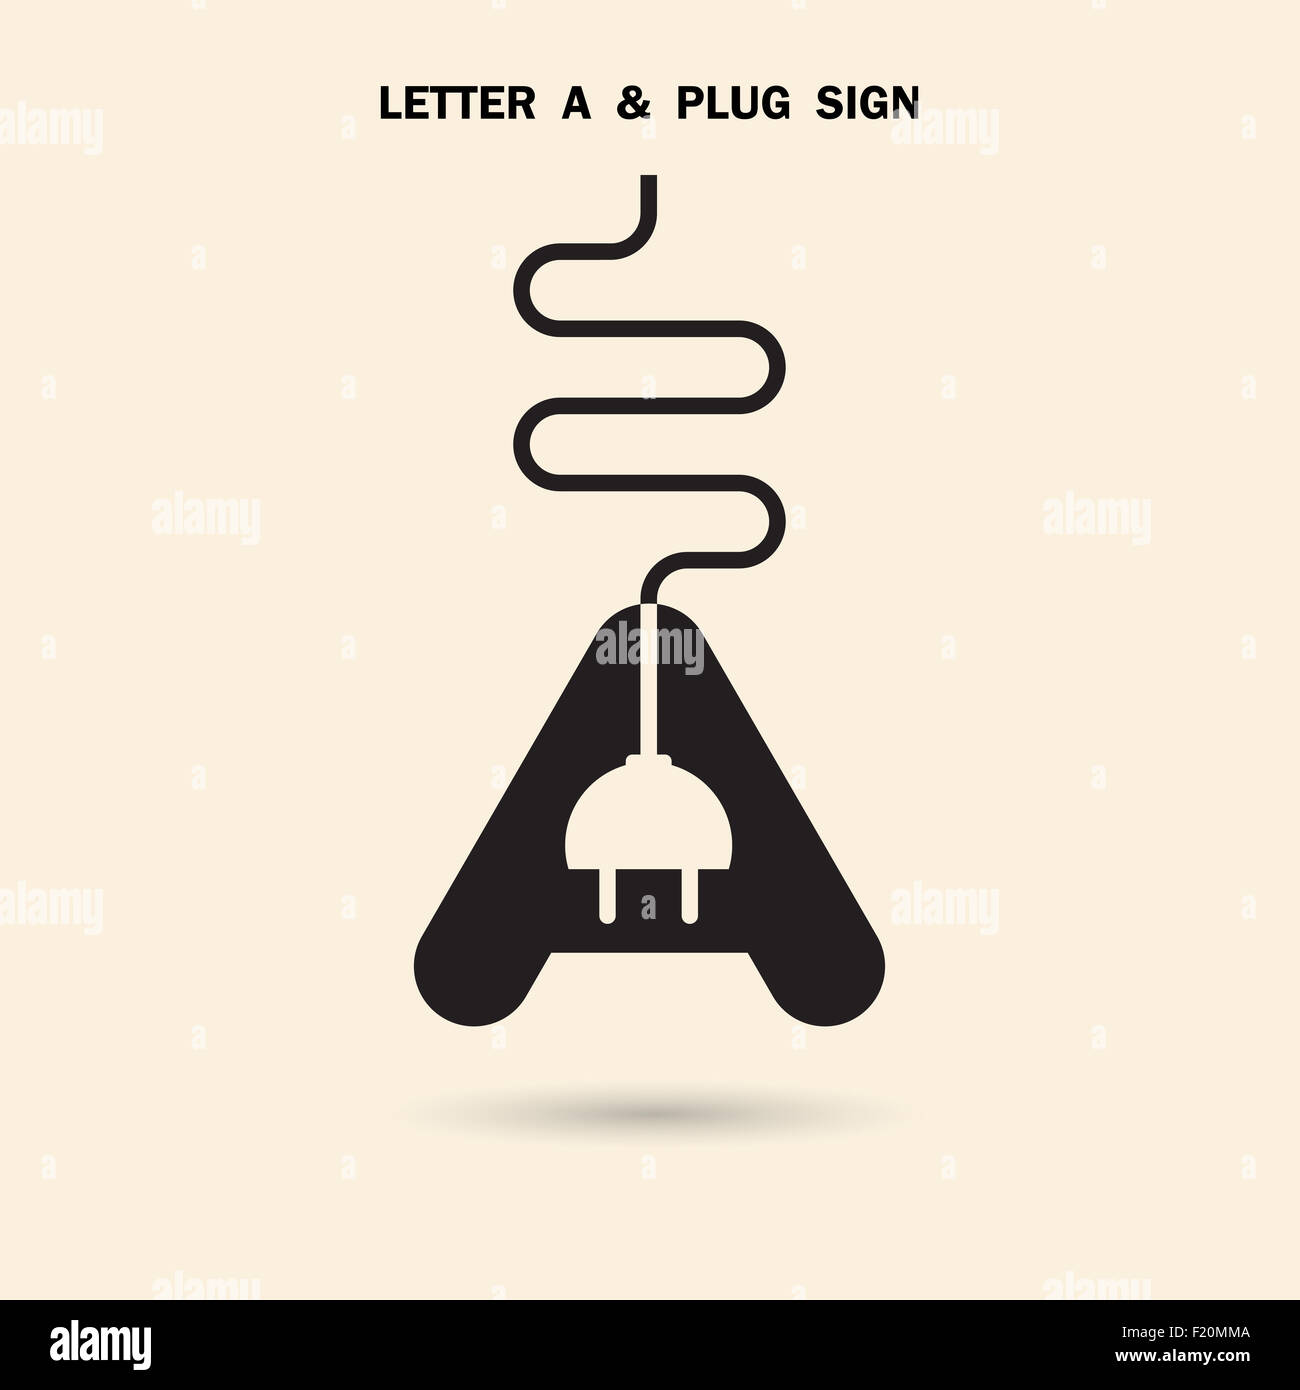 Creative letter A icon abstract logo design template with electrical plug symbol. Stock Photo